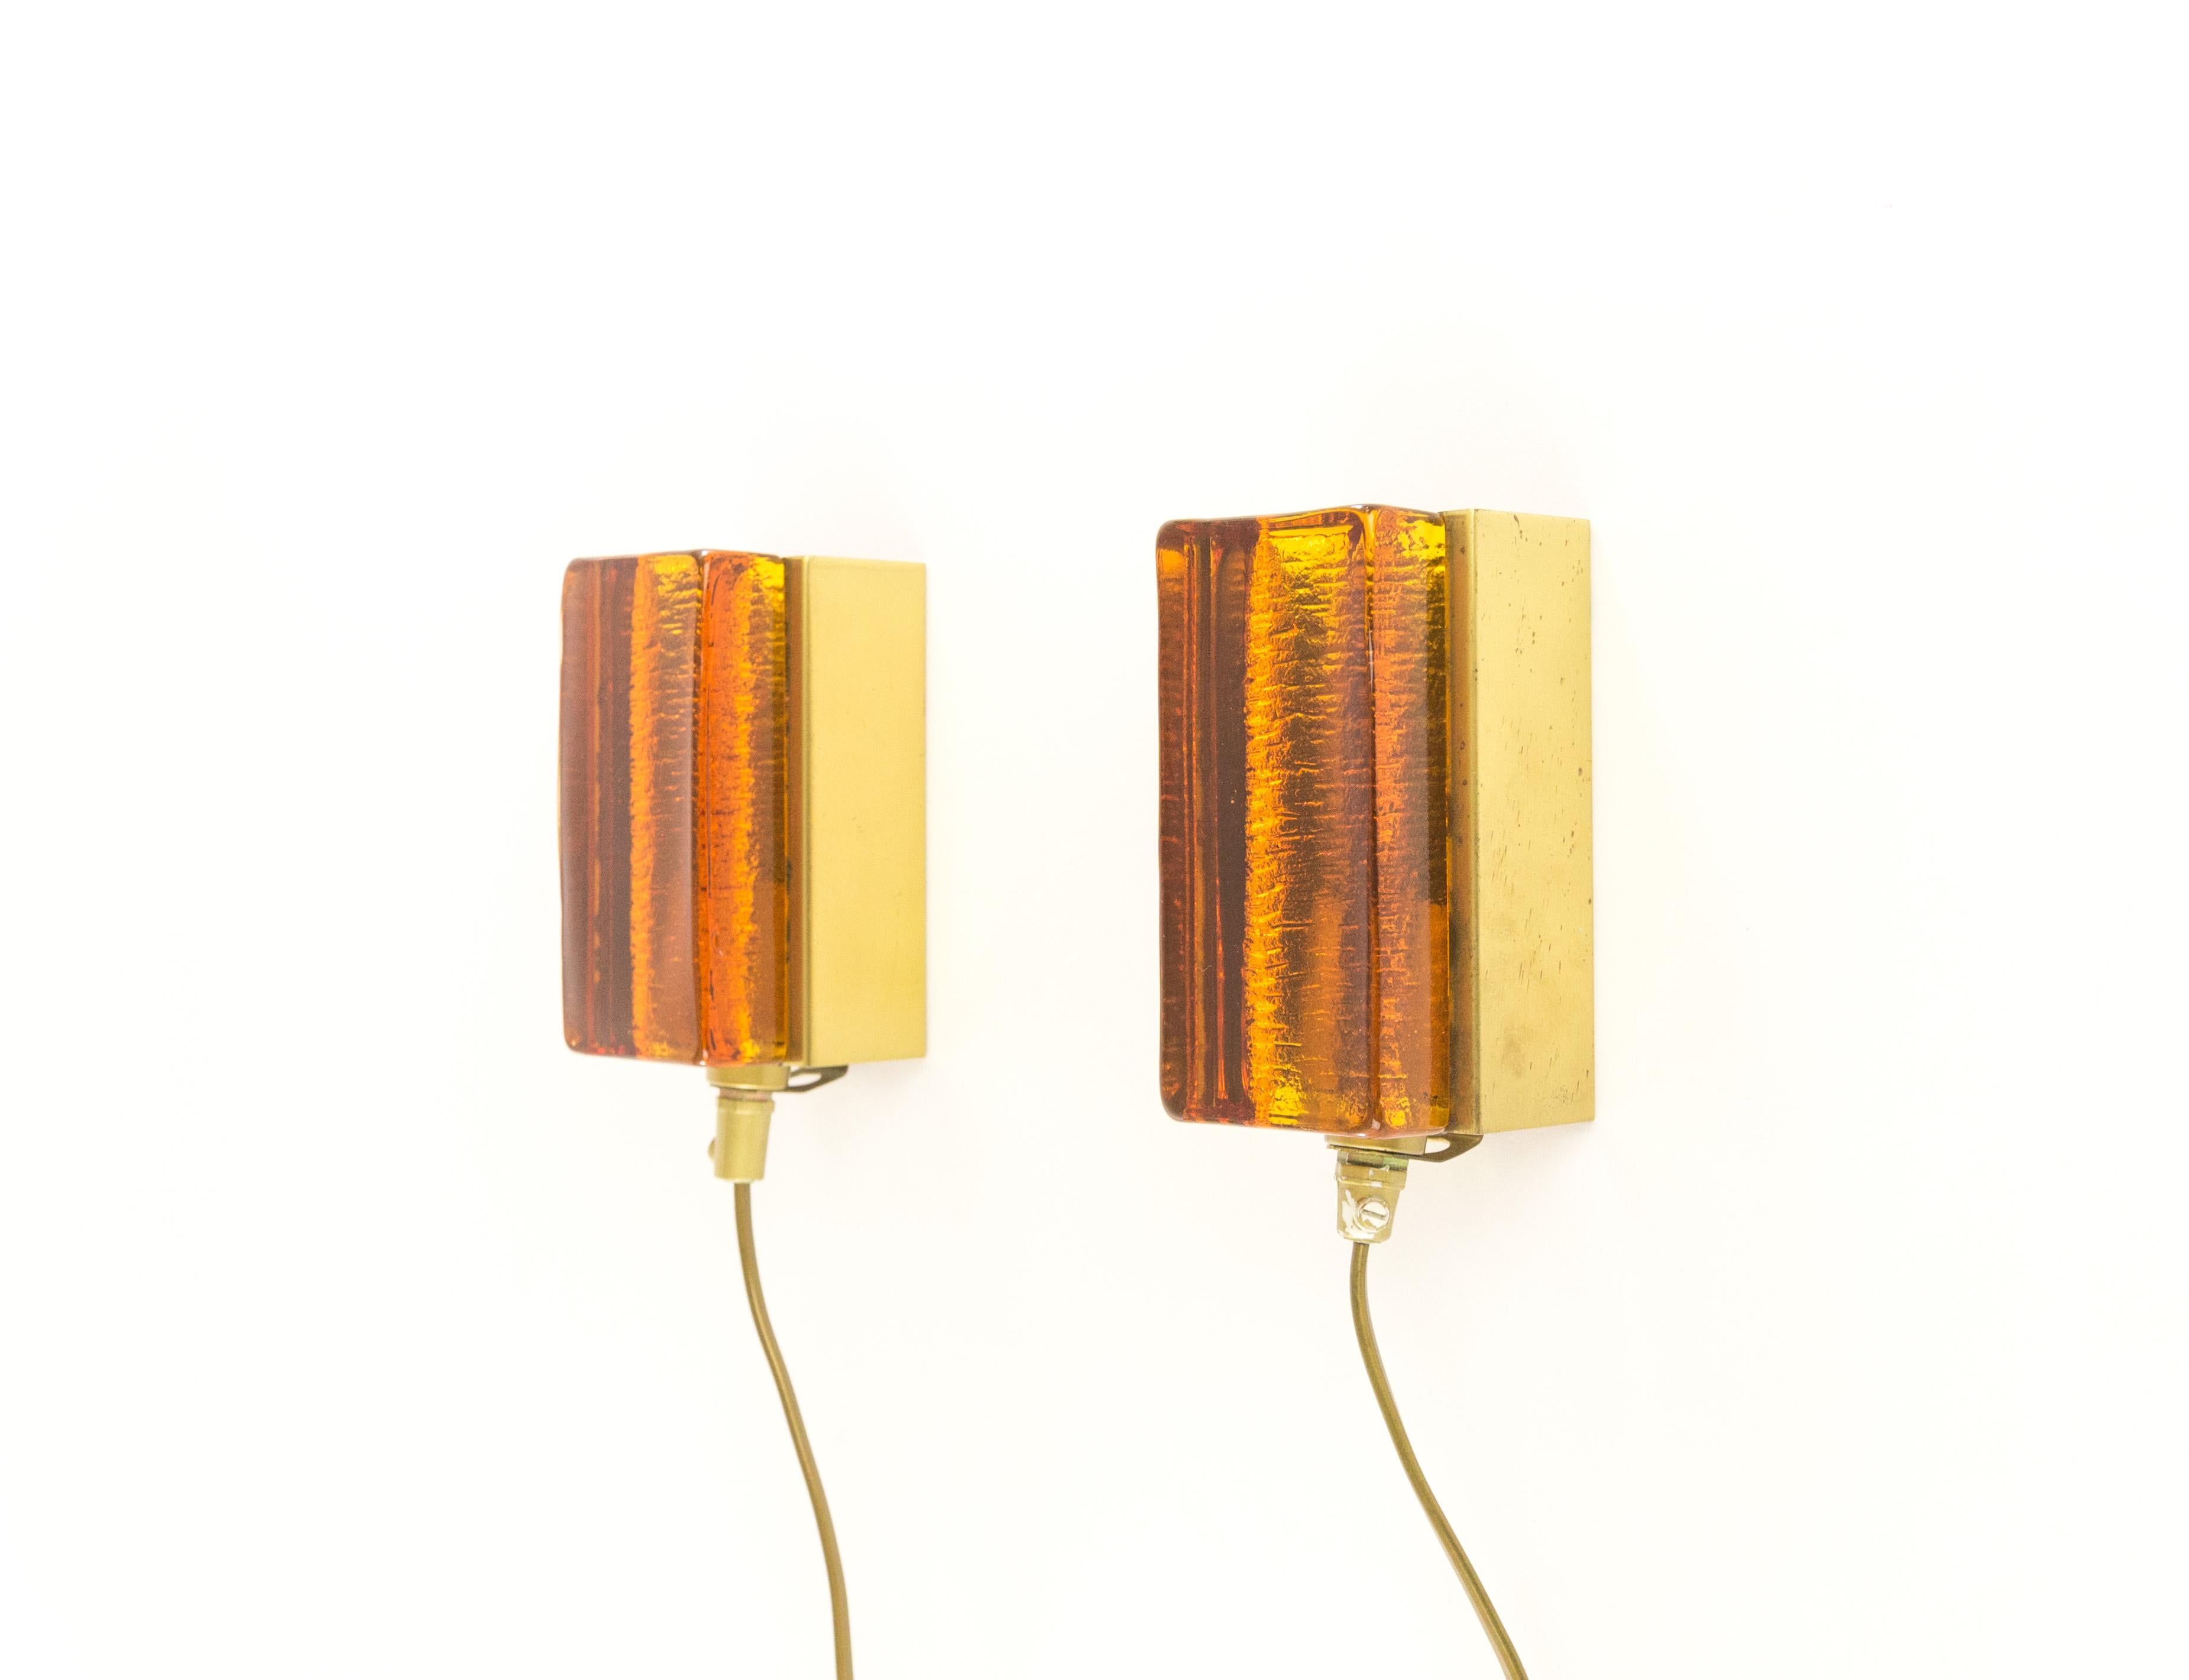 A set of two amber glass and brass Atlantic wall lamps that are produced by Danish lighting manufacturer Vitrika in the 1970s. Both lamps consists of two parts: a solid handmade glass body in gold, and the brass holder.

The price is for the pair.